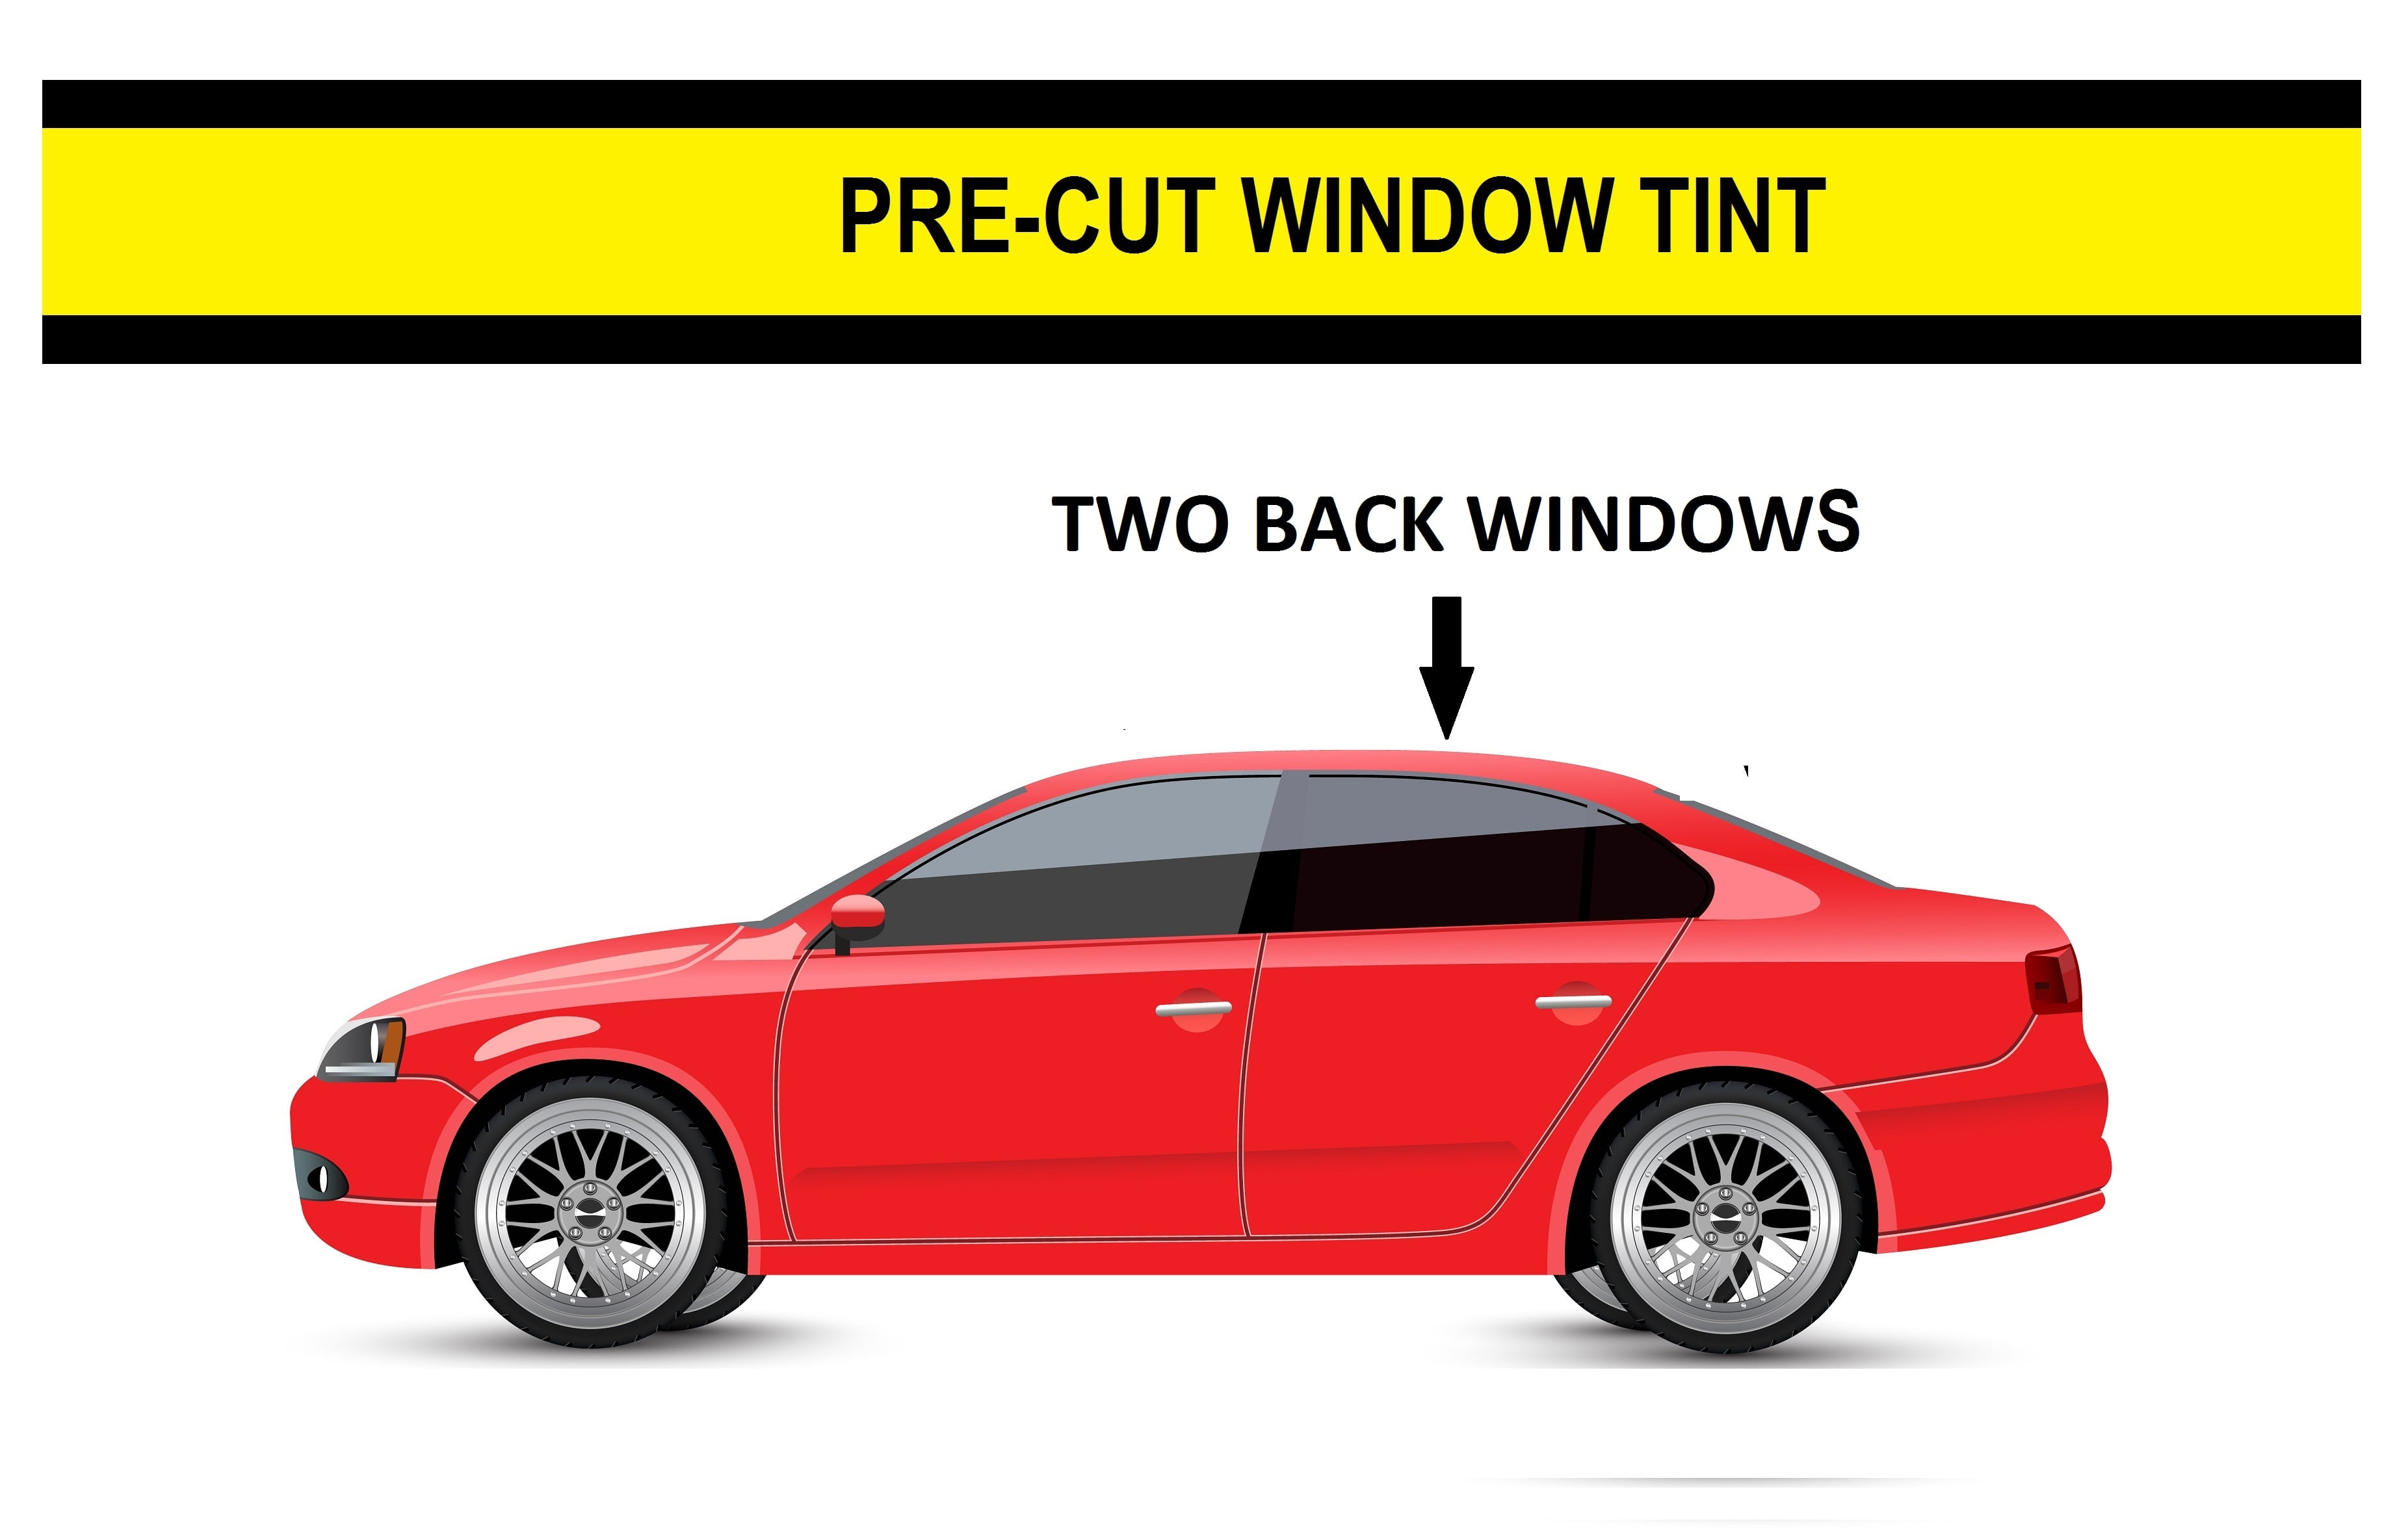 Precut All Window Film for Nissan Altima 02-06 any Tint Shade